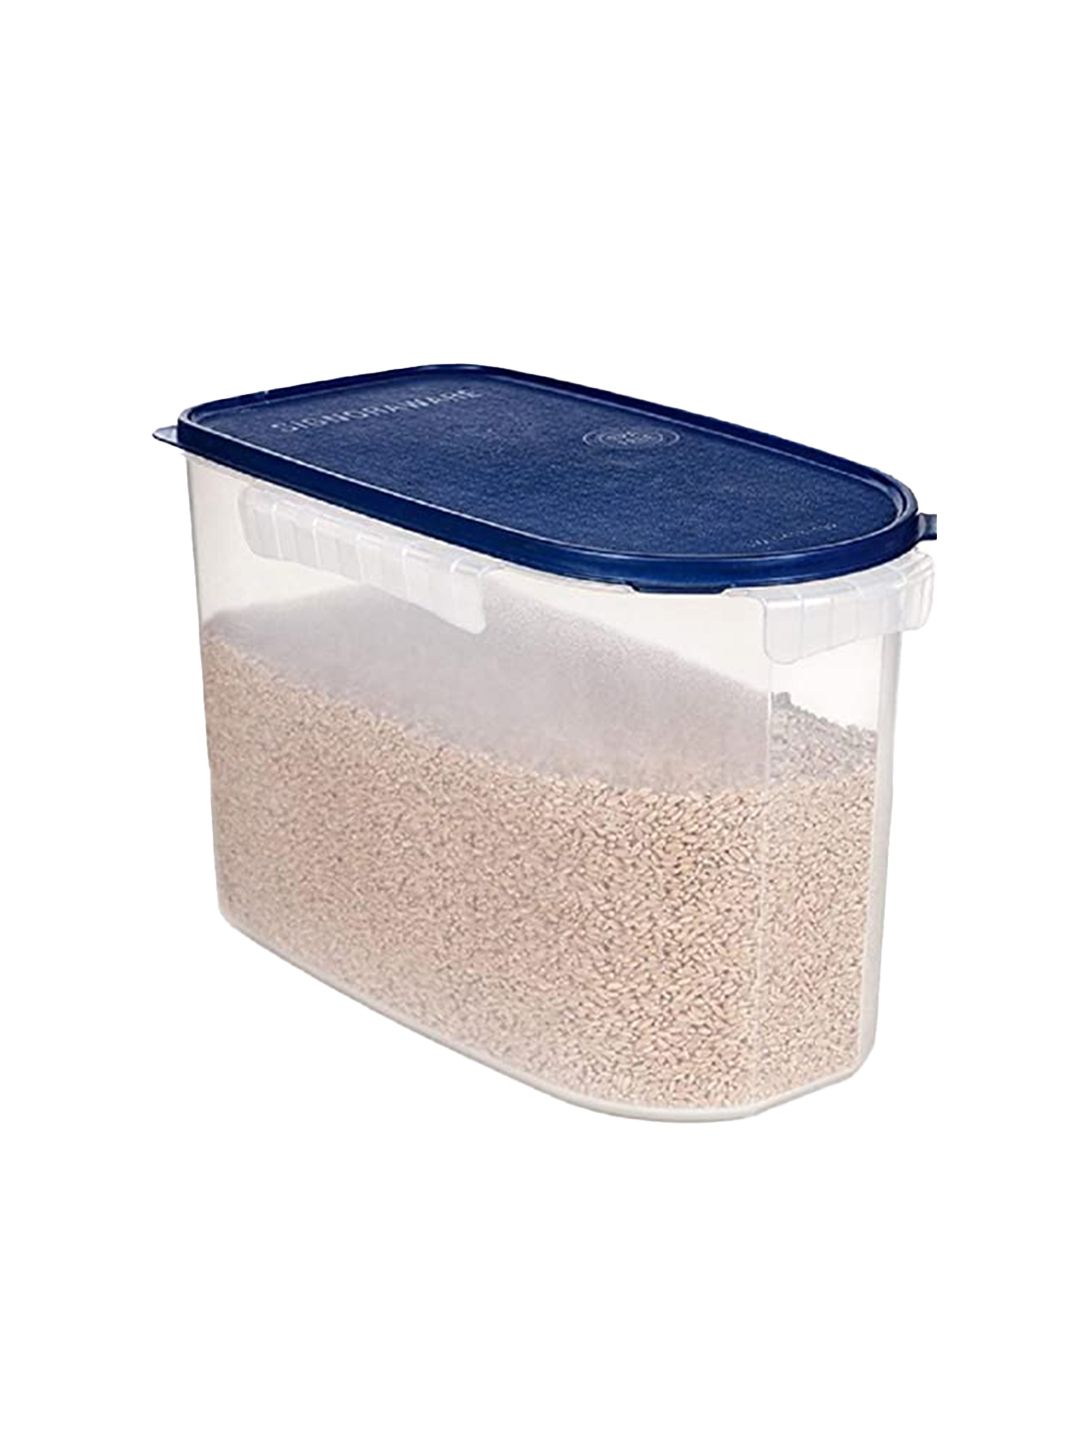 SignoraWare Blue & Transparent Oval Food Container Price in India